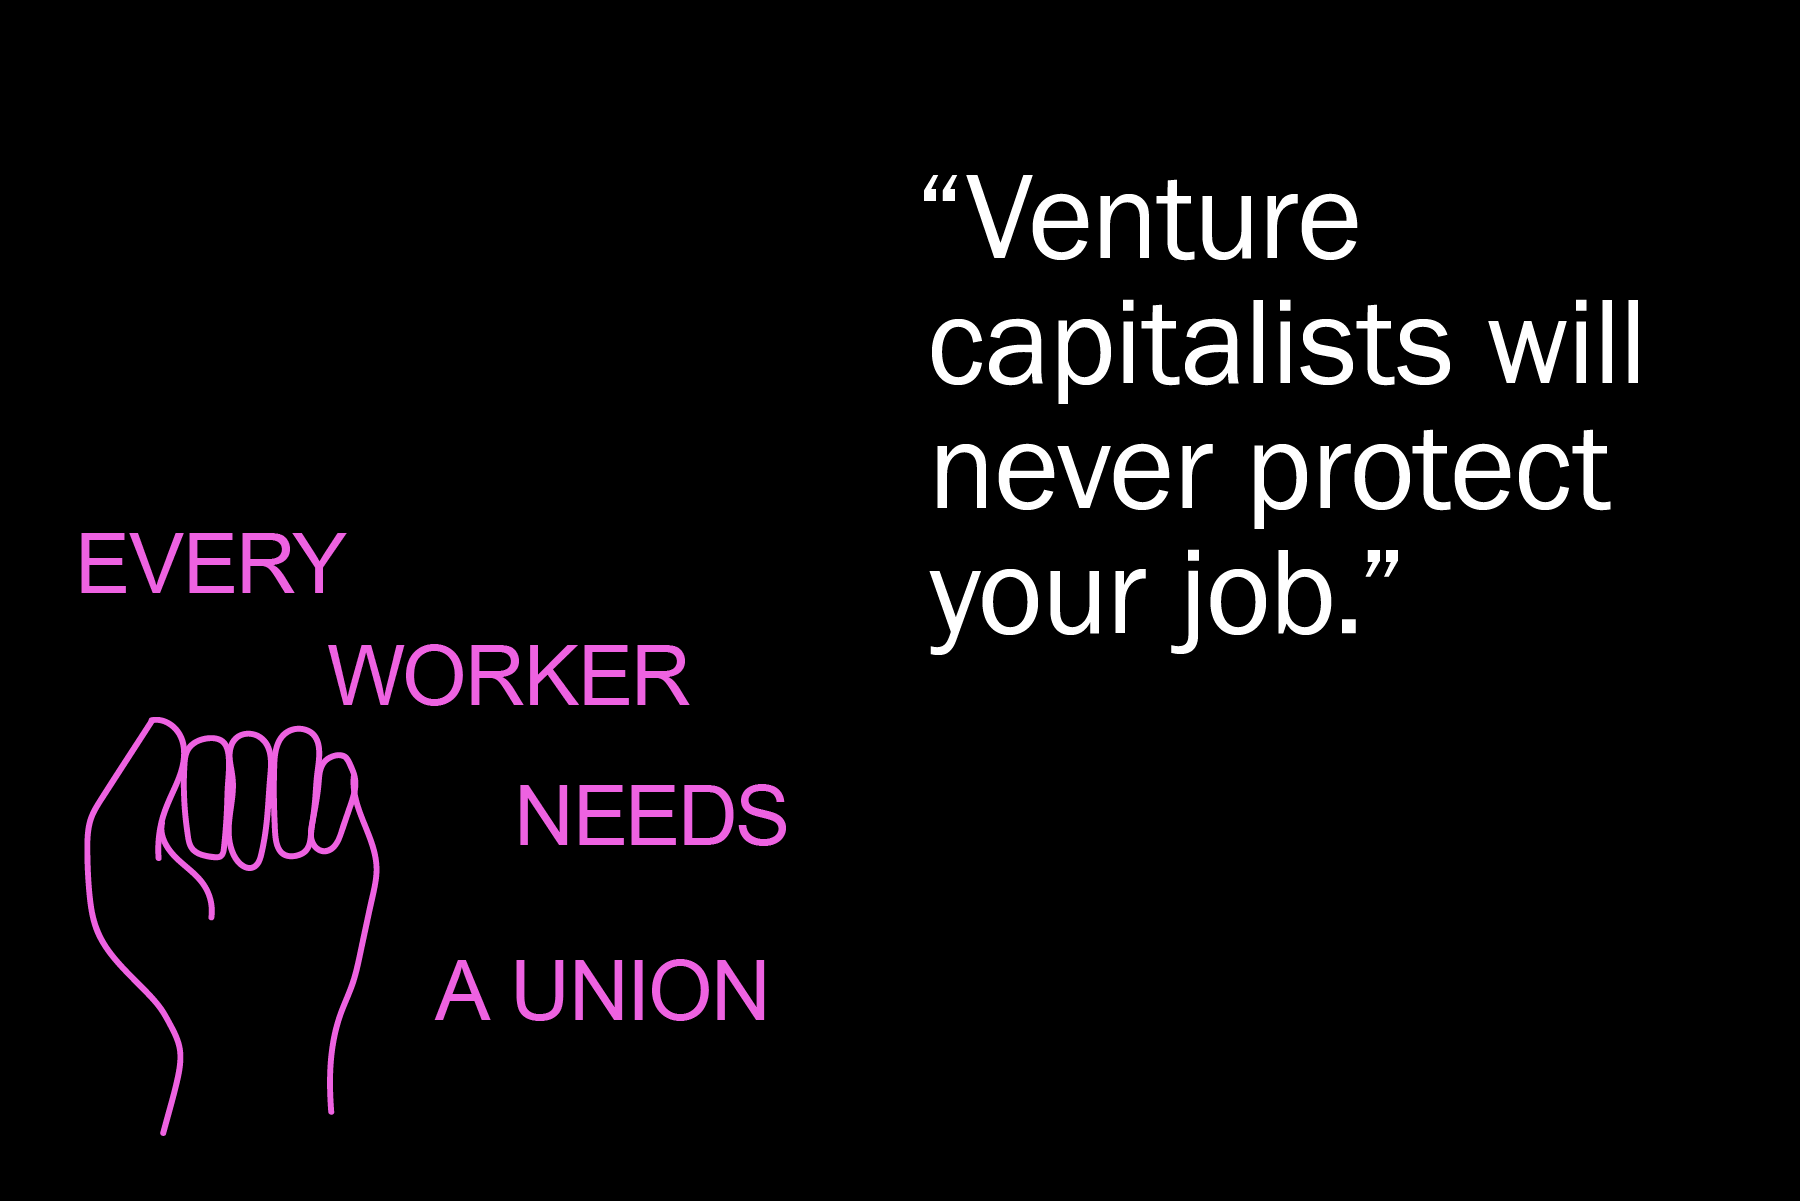 Venture capitalists will never protect your job.